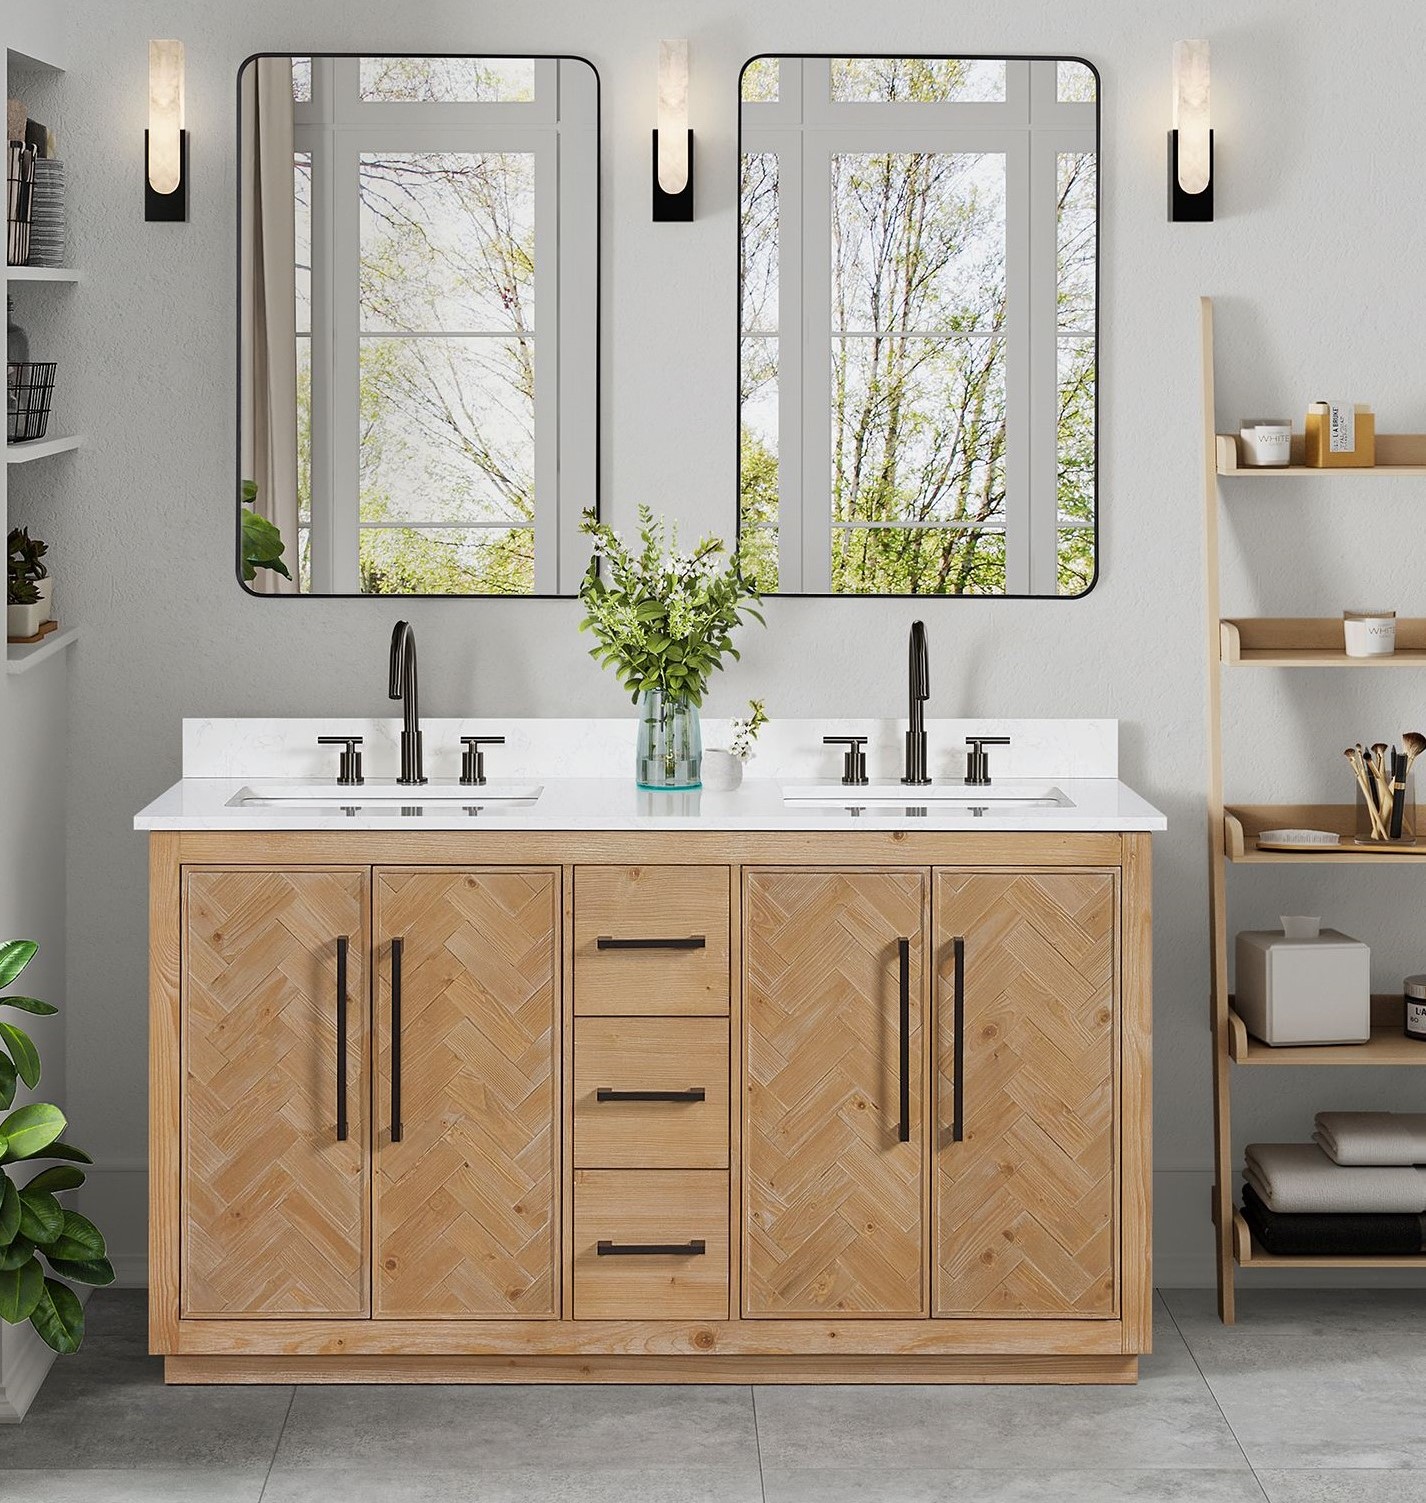 Issac Edwards 60" Double Bathroom Vanity in Weathered Fir with Grain White Engineered Stone Countertop with Mirror